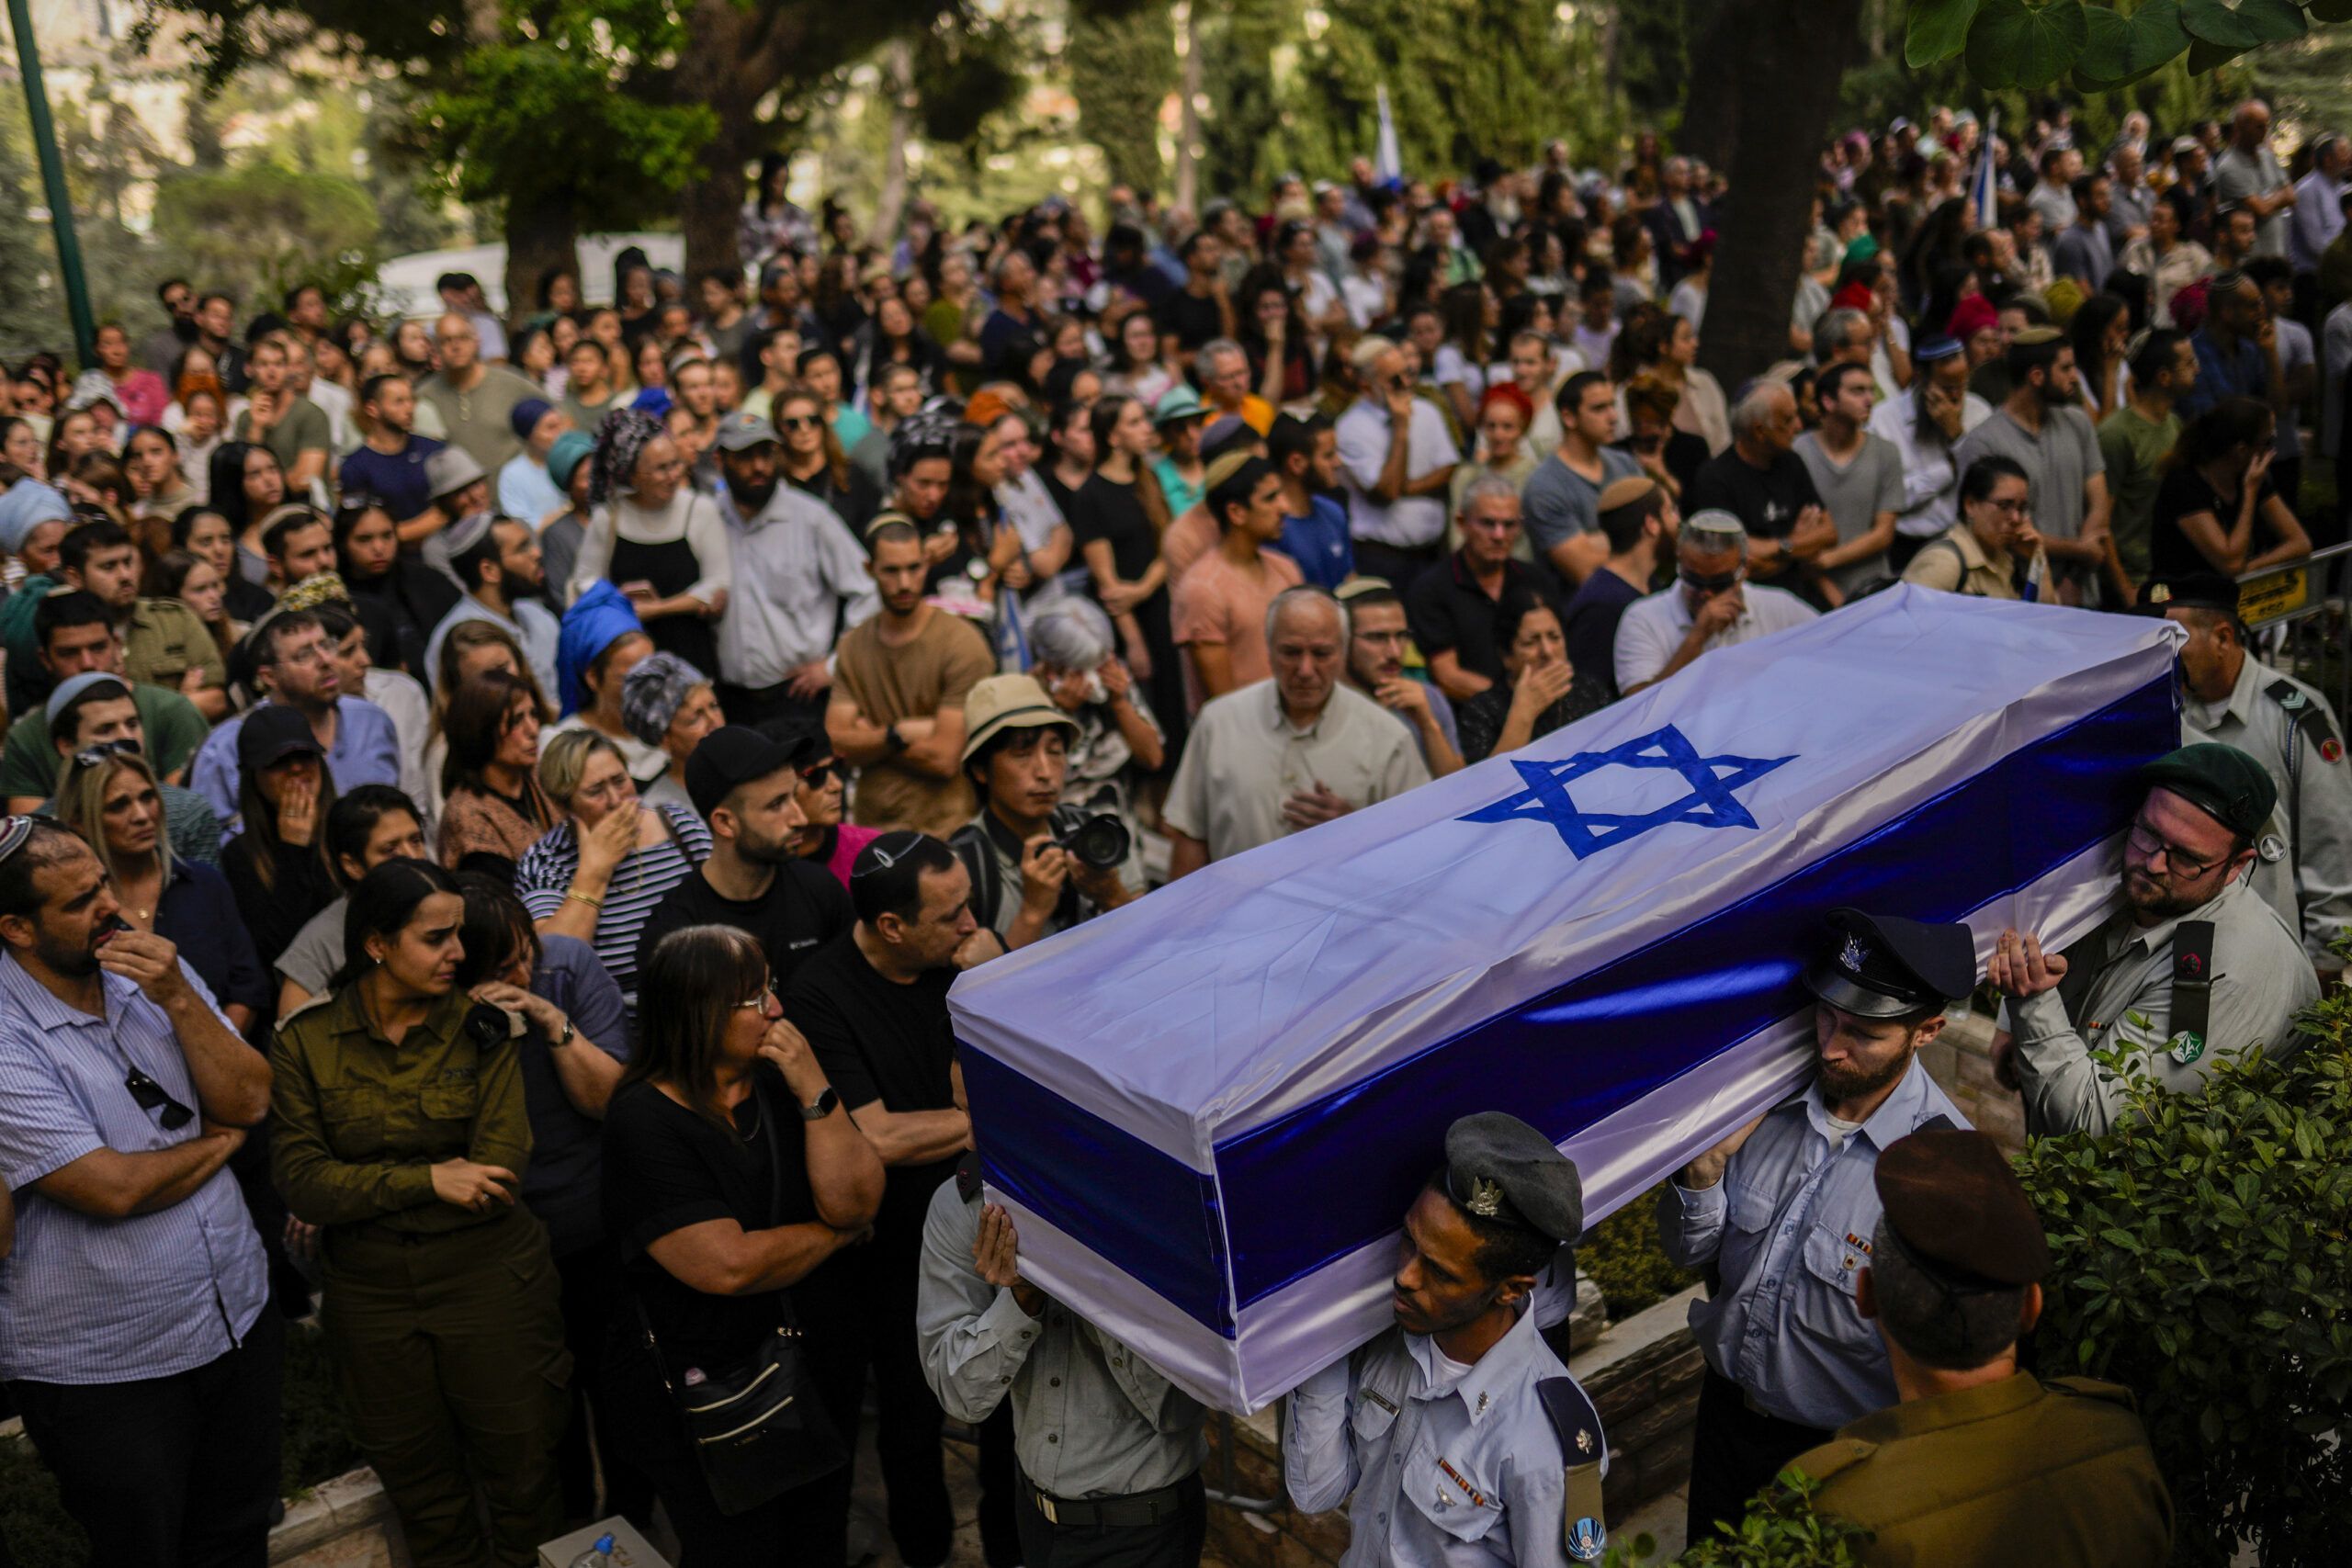 FILE - Israeli soldiers carry the flag-covered coffin of Shilo Rauchberger at the Mount Herzl cemetery in Jerusalem, Thursday, Oct. 12, 2023. In Israel on Saturday, rabbis worked around the clock at Shura military base in Israel to identify and count the dead civilians and soldiers gunned down in the Hamas attack last week. Israel's military rabbinate is working on Shabbat for the first time since 2005. Some of the bodies have been brought to Mount Herzl, Israel's national cemetery in Jerusalem. (AP Photo/Francisco Seco, File)